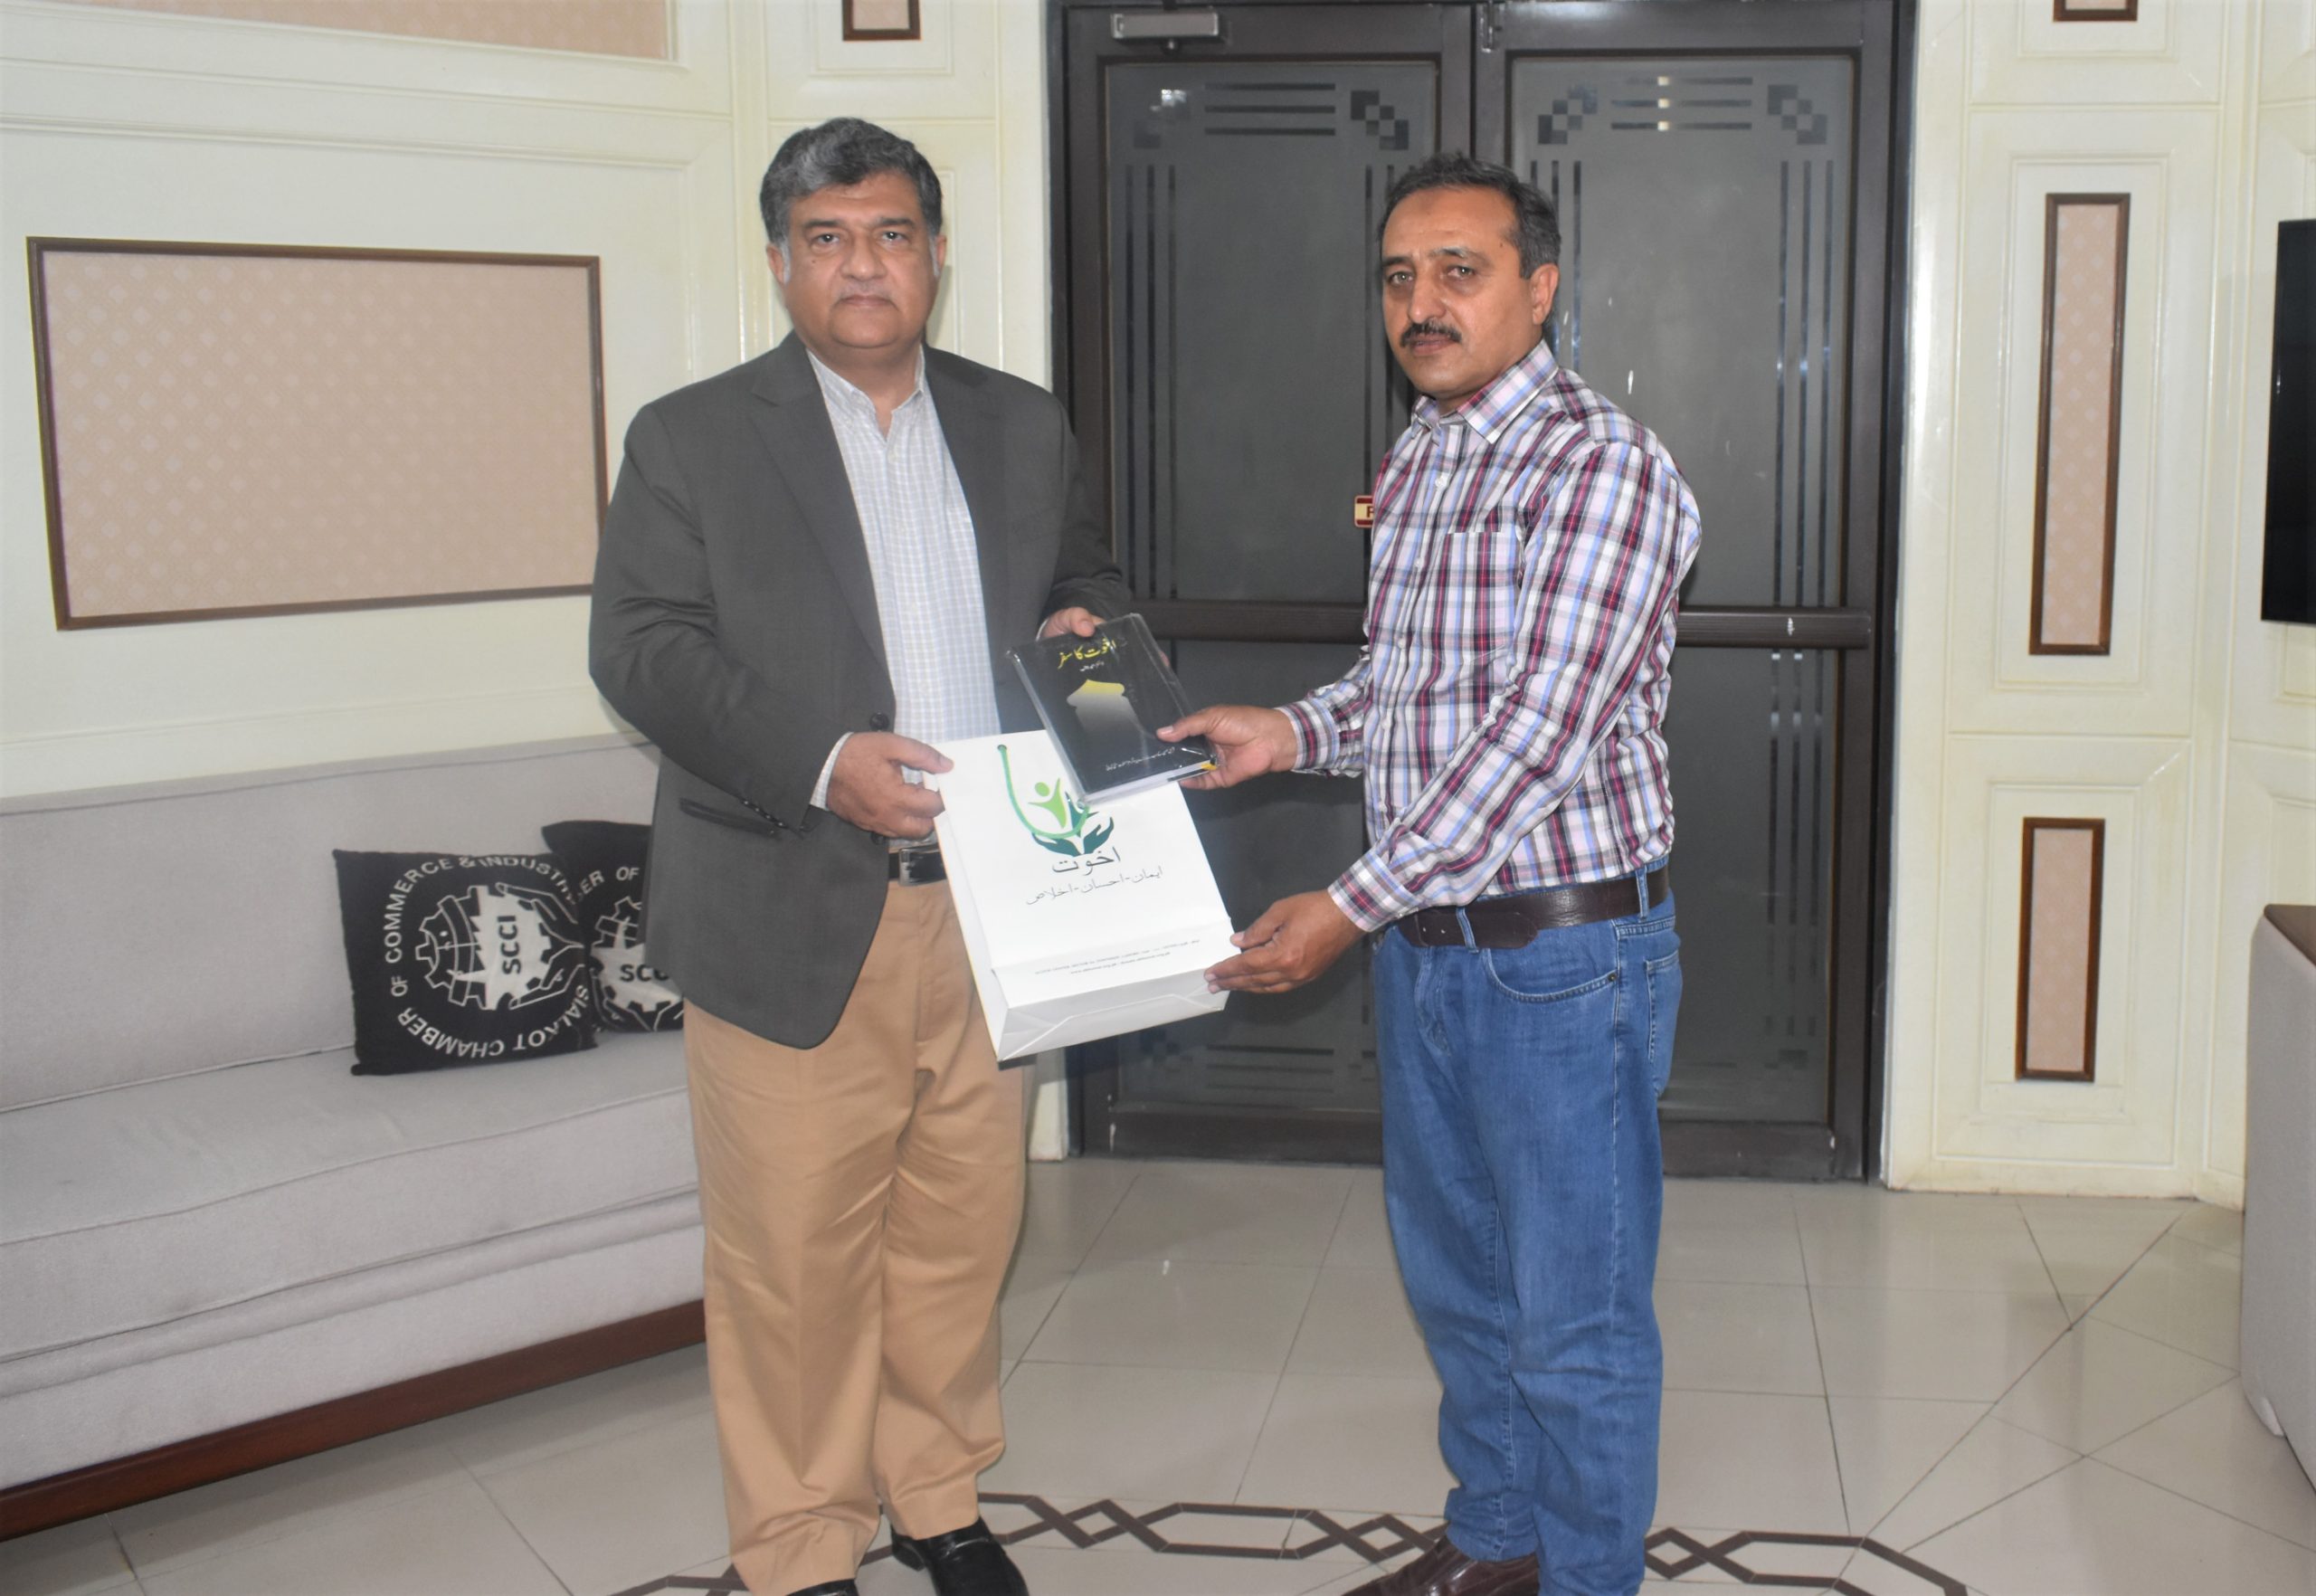 On March 14, 2022, Mian Imran Akbar, President Sialkot Chamber had a meeting with representative from Akhuwat Foundation Mr. Shamas to discuss the matters of mutual interest.